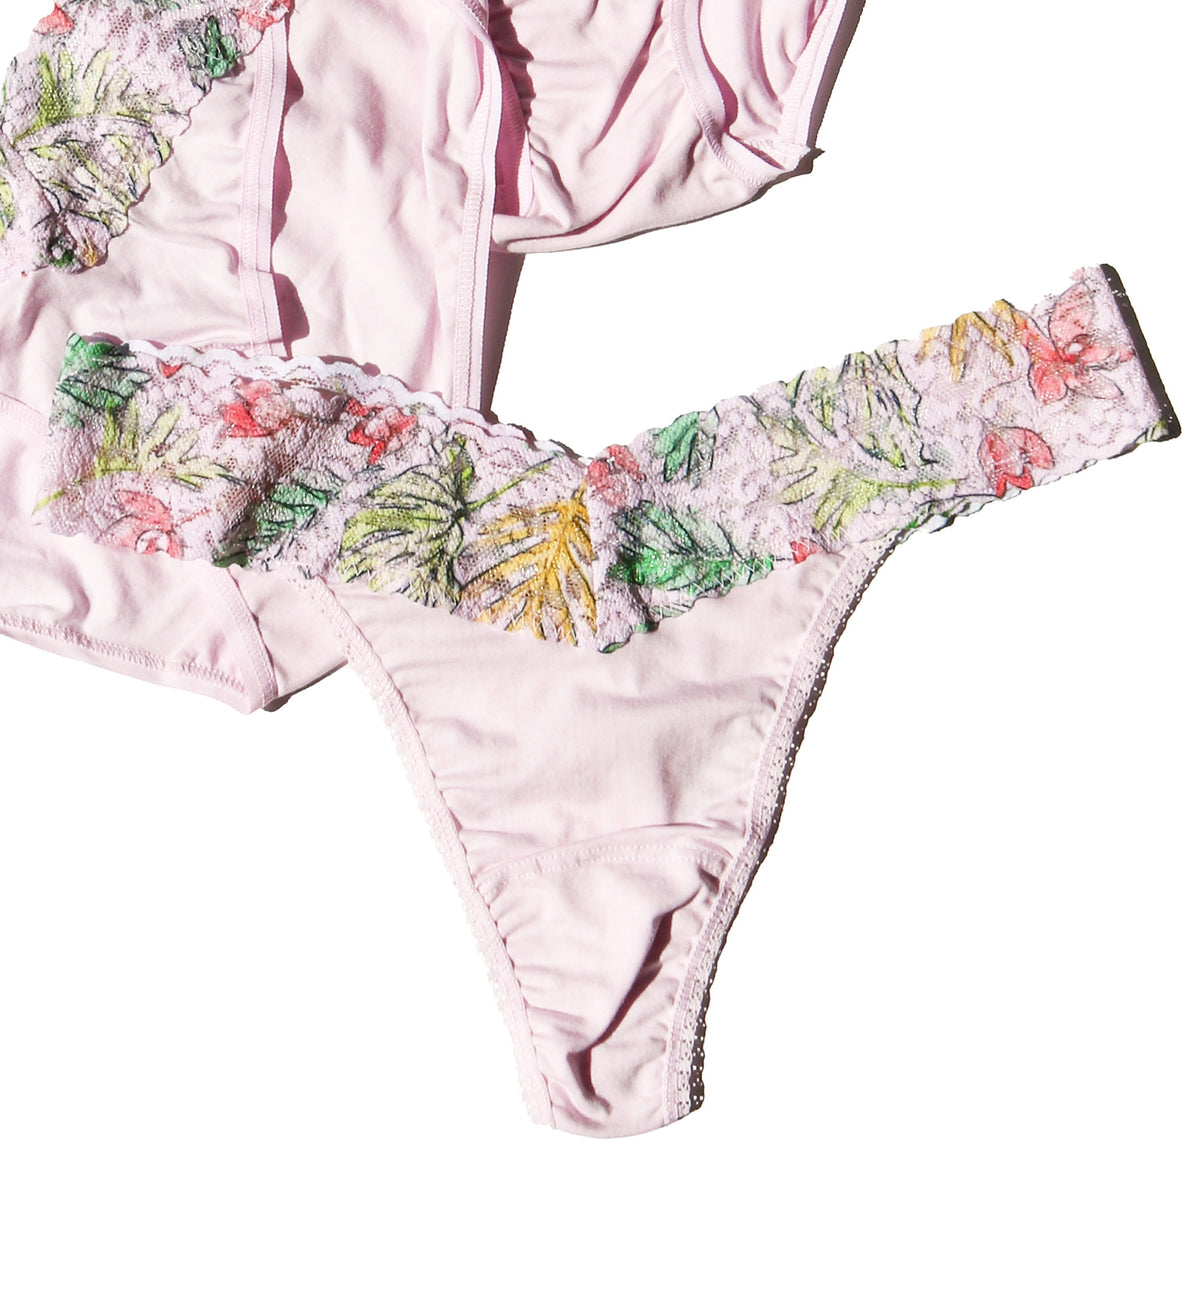 Hanky Panky Cotton-Spandex Original Rise Thong (891802),Island Pink/Lovely Leaves - Lovely Leaves,One Size